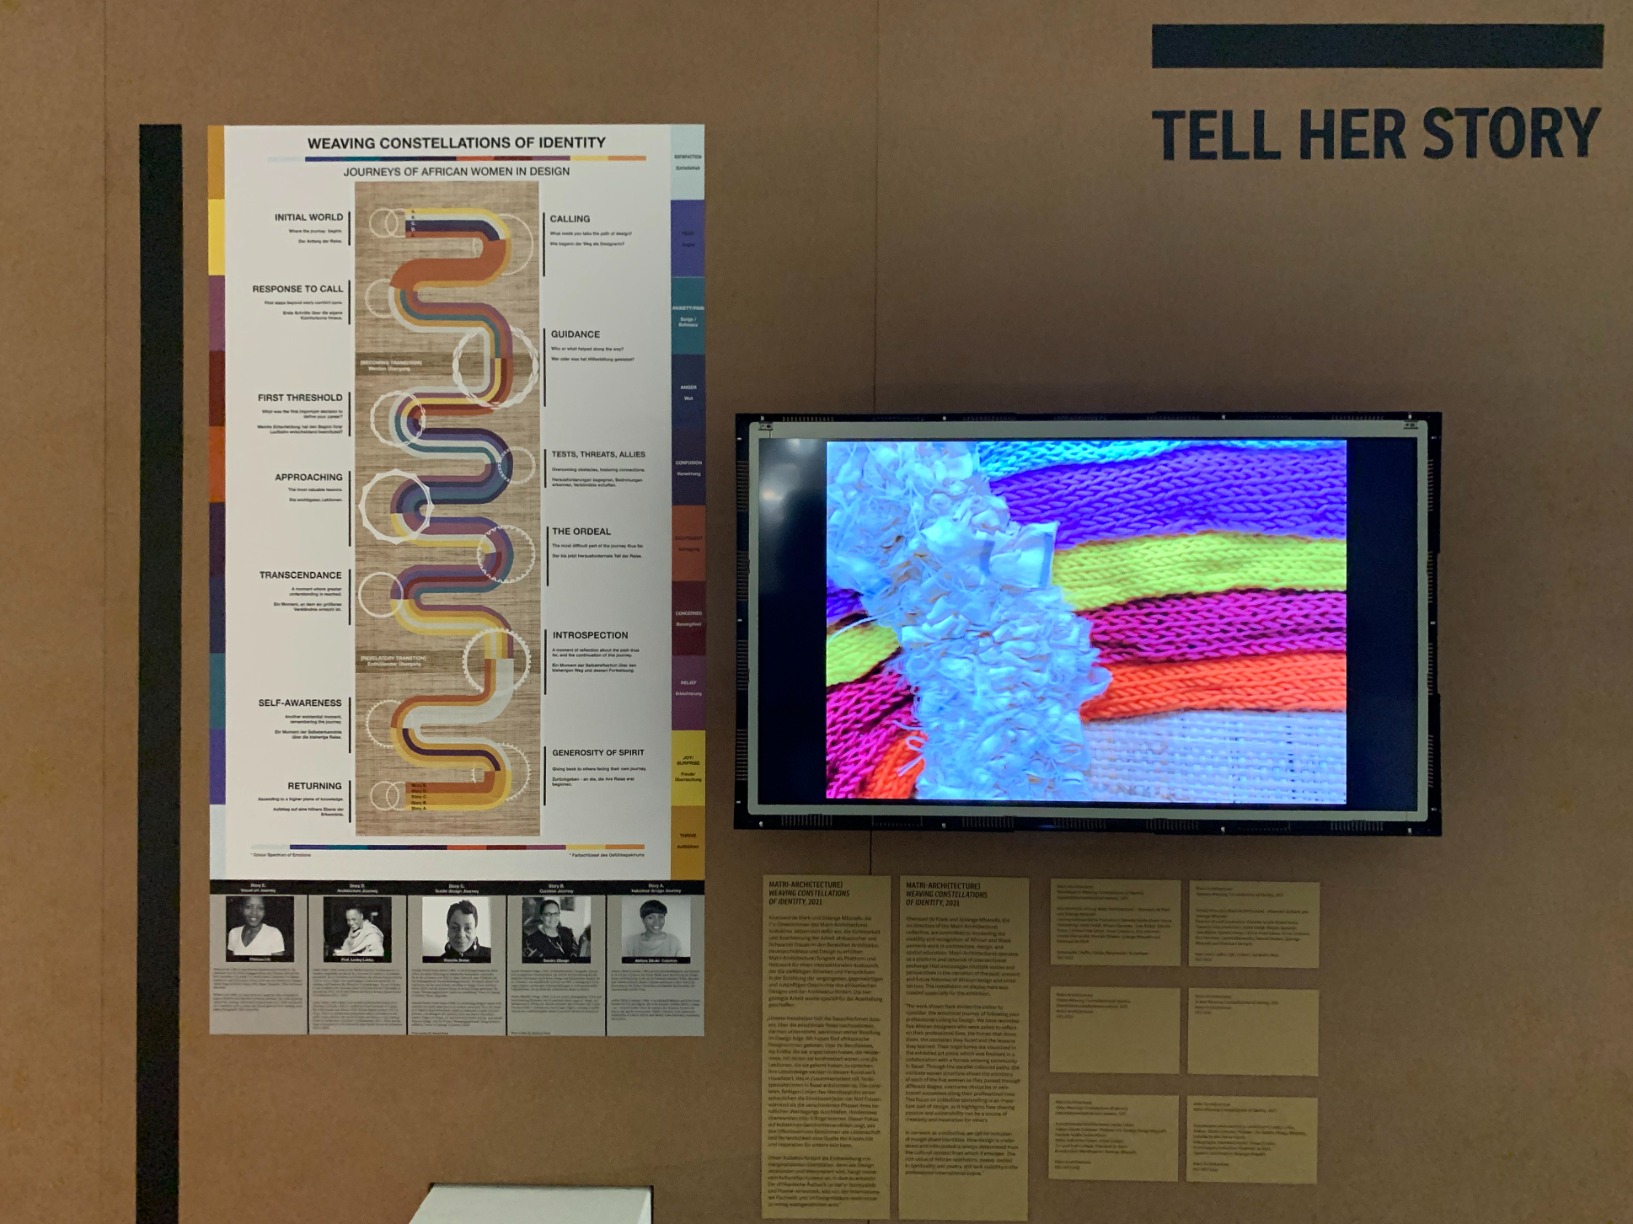 Photo of artwork poster explaining the colour-coded artwork as well as a soundscape video seen on the screen on the wall.